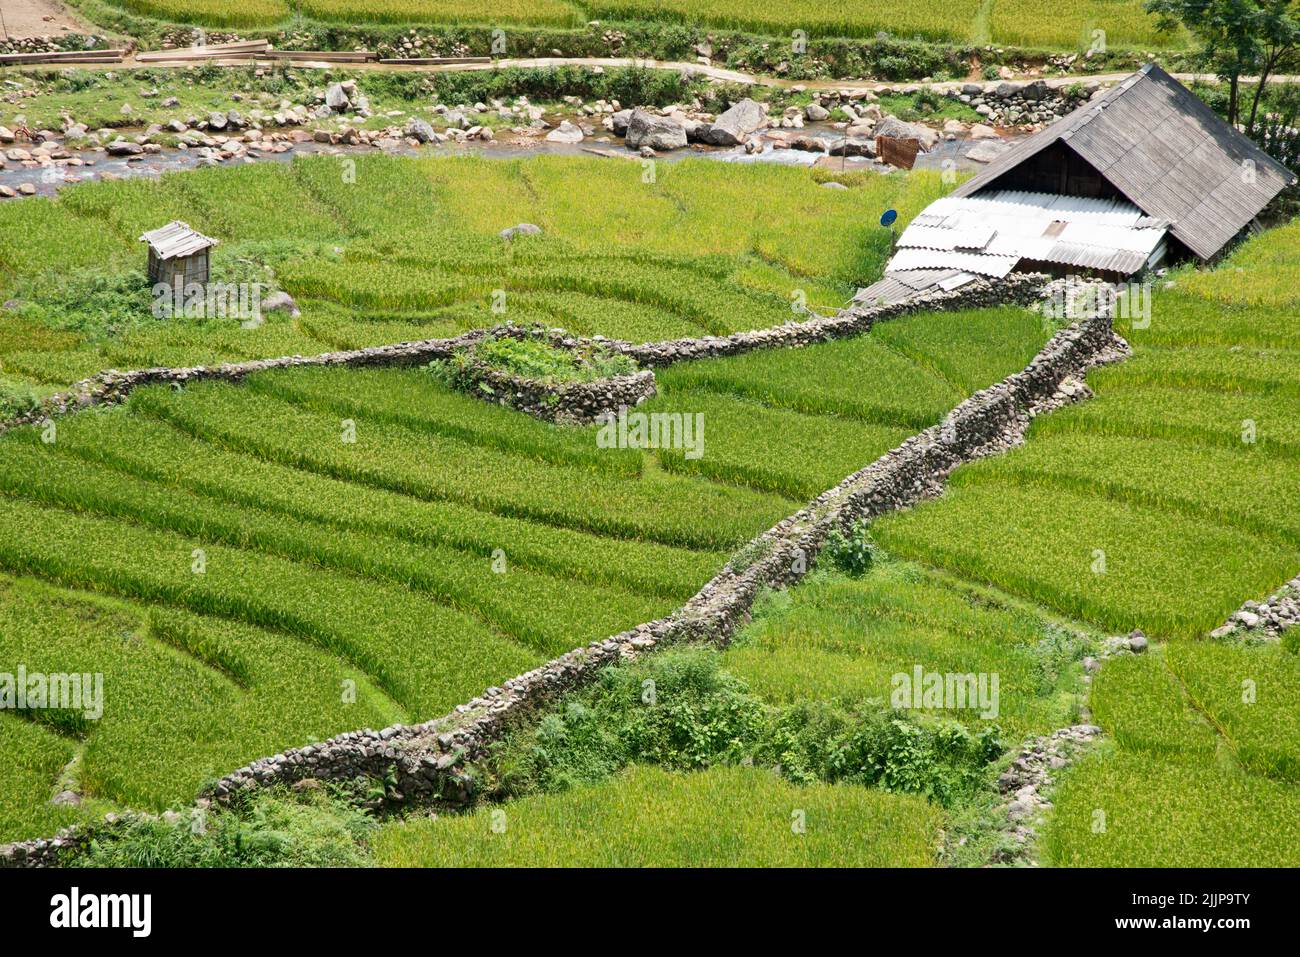 A small house in the middle of a rice field in Sa Pa, Vietnam Stock Photo